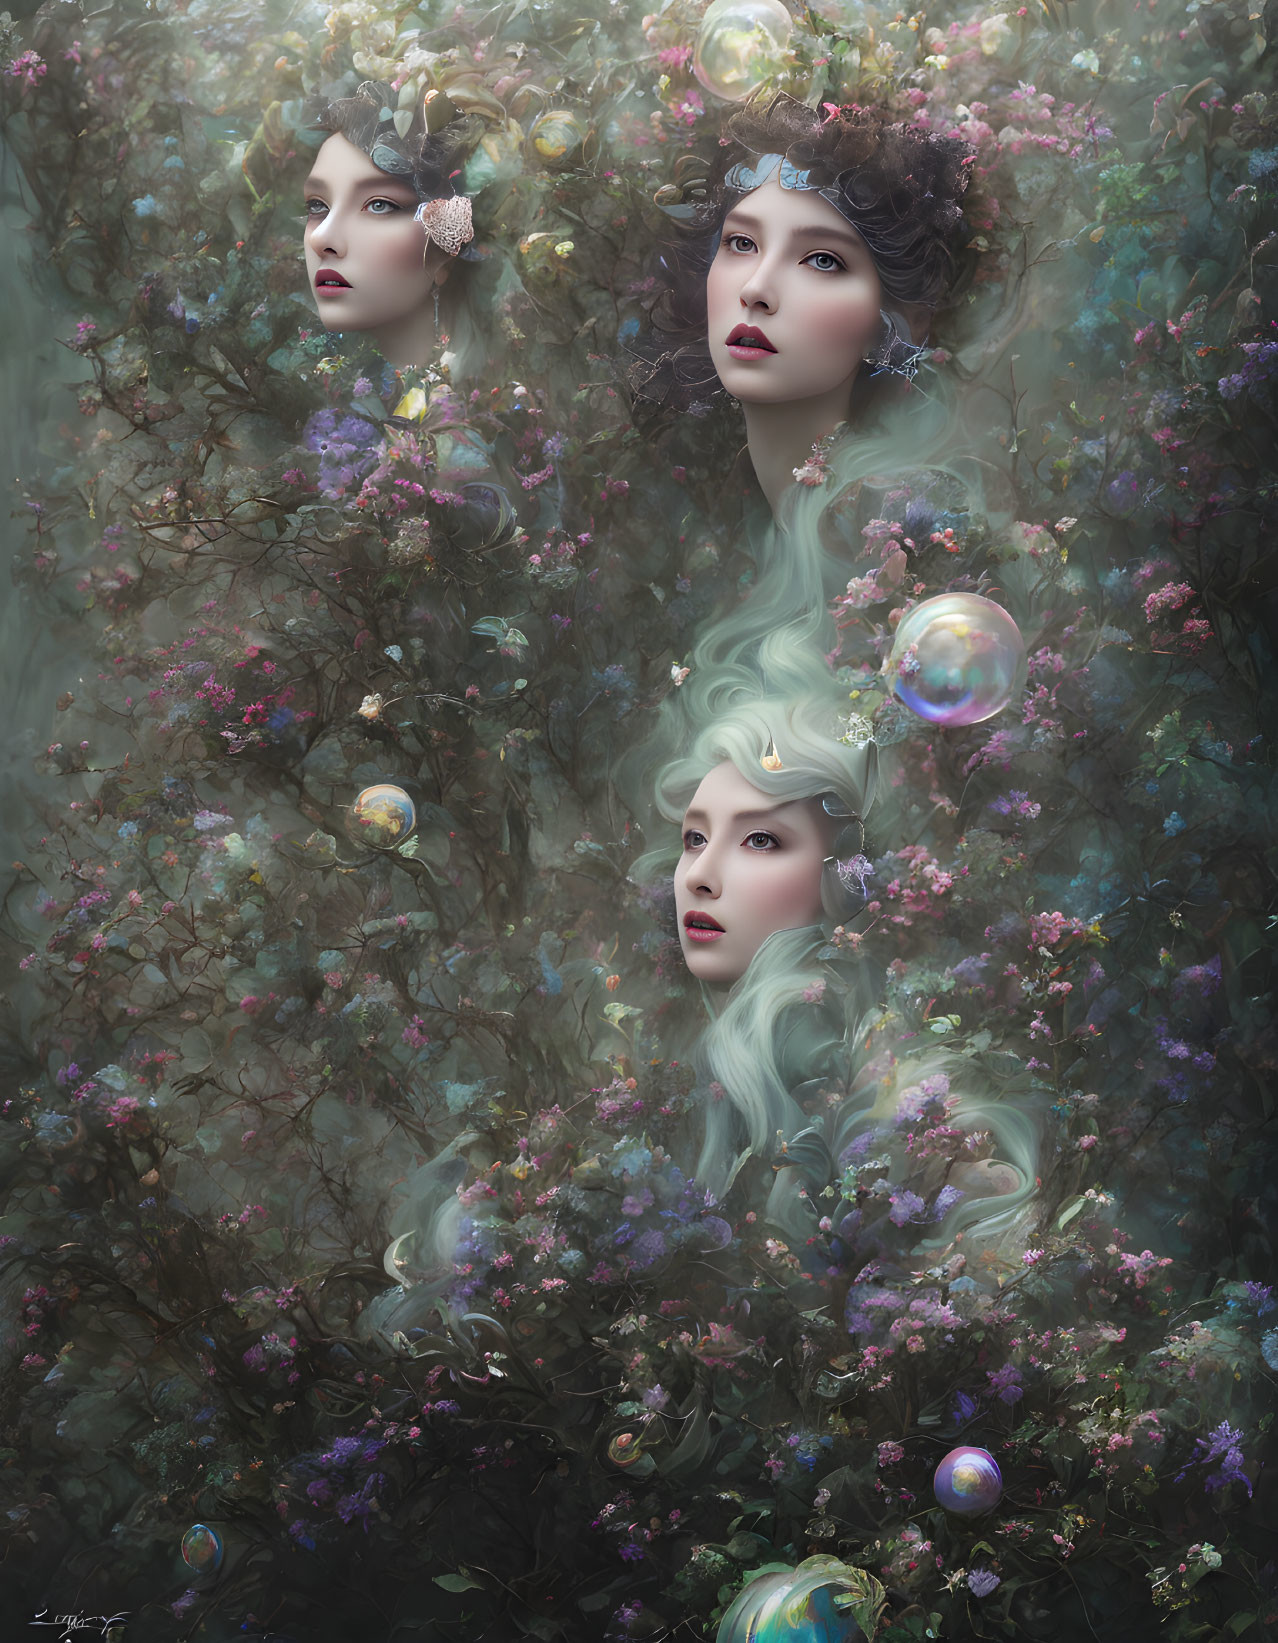 Ethereal female faces in mystical floral background with soft hues